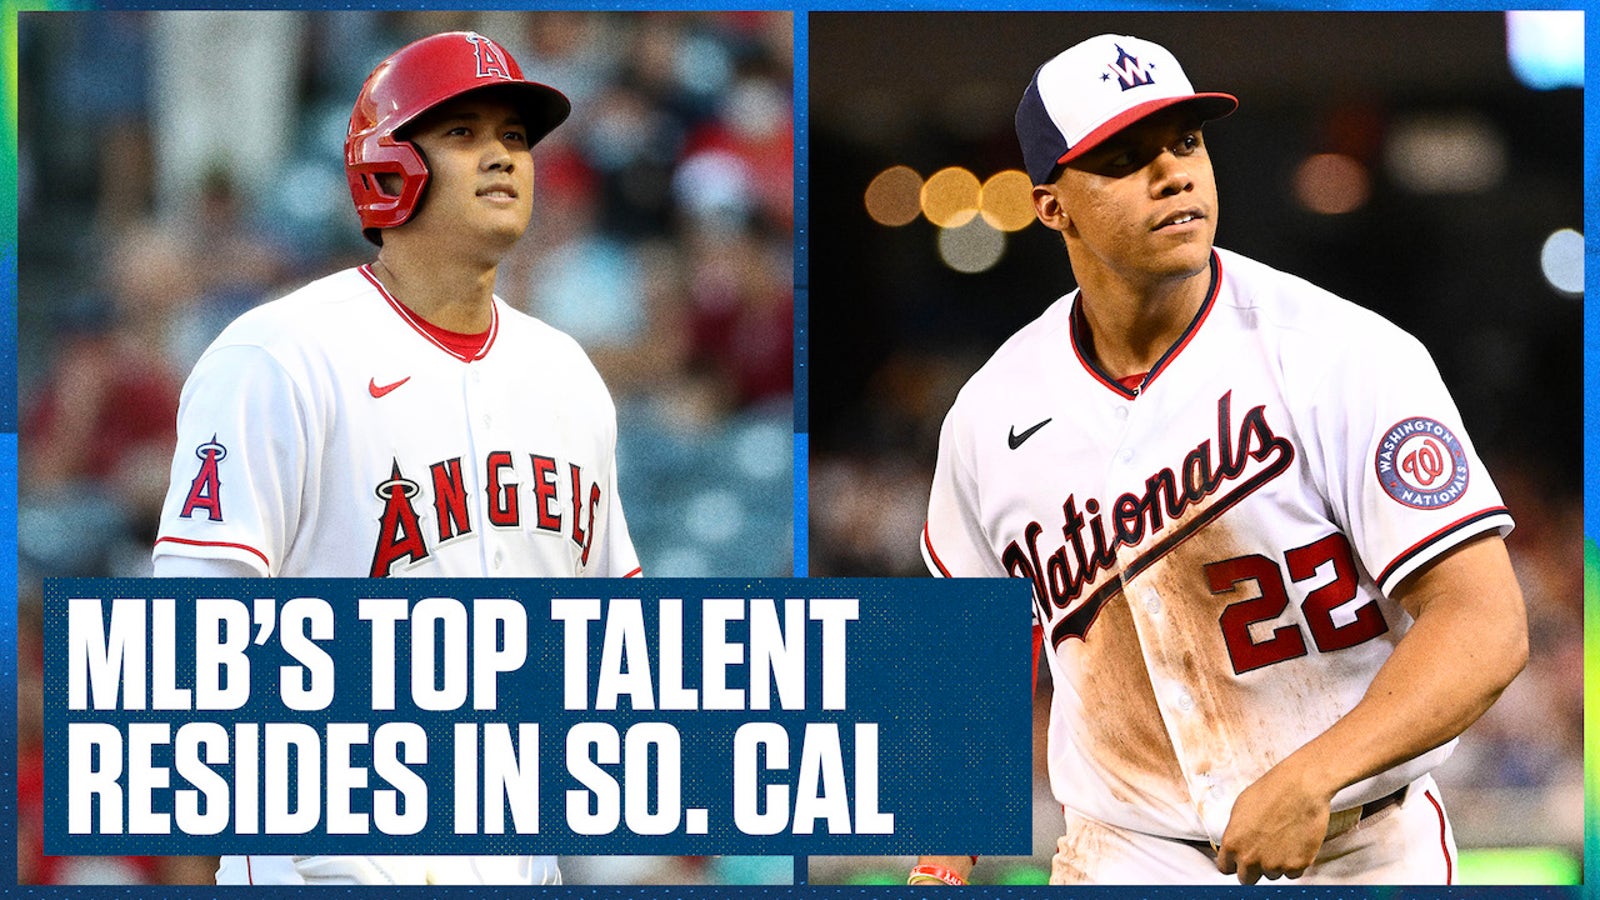 Shohei Ohtani, Juan Soto & others make Southern California the top talent pool in MLB